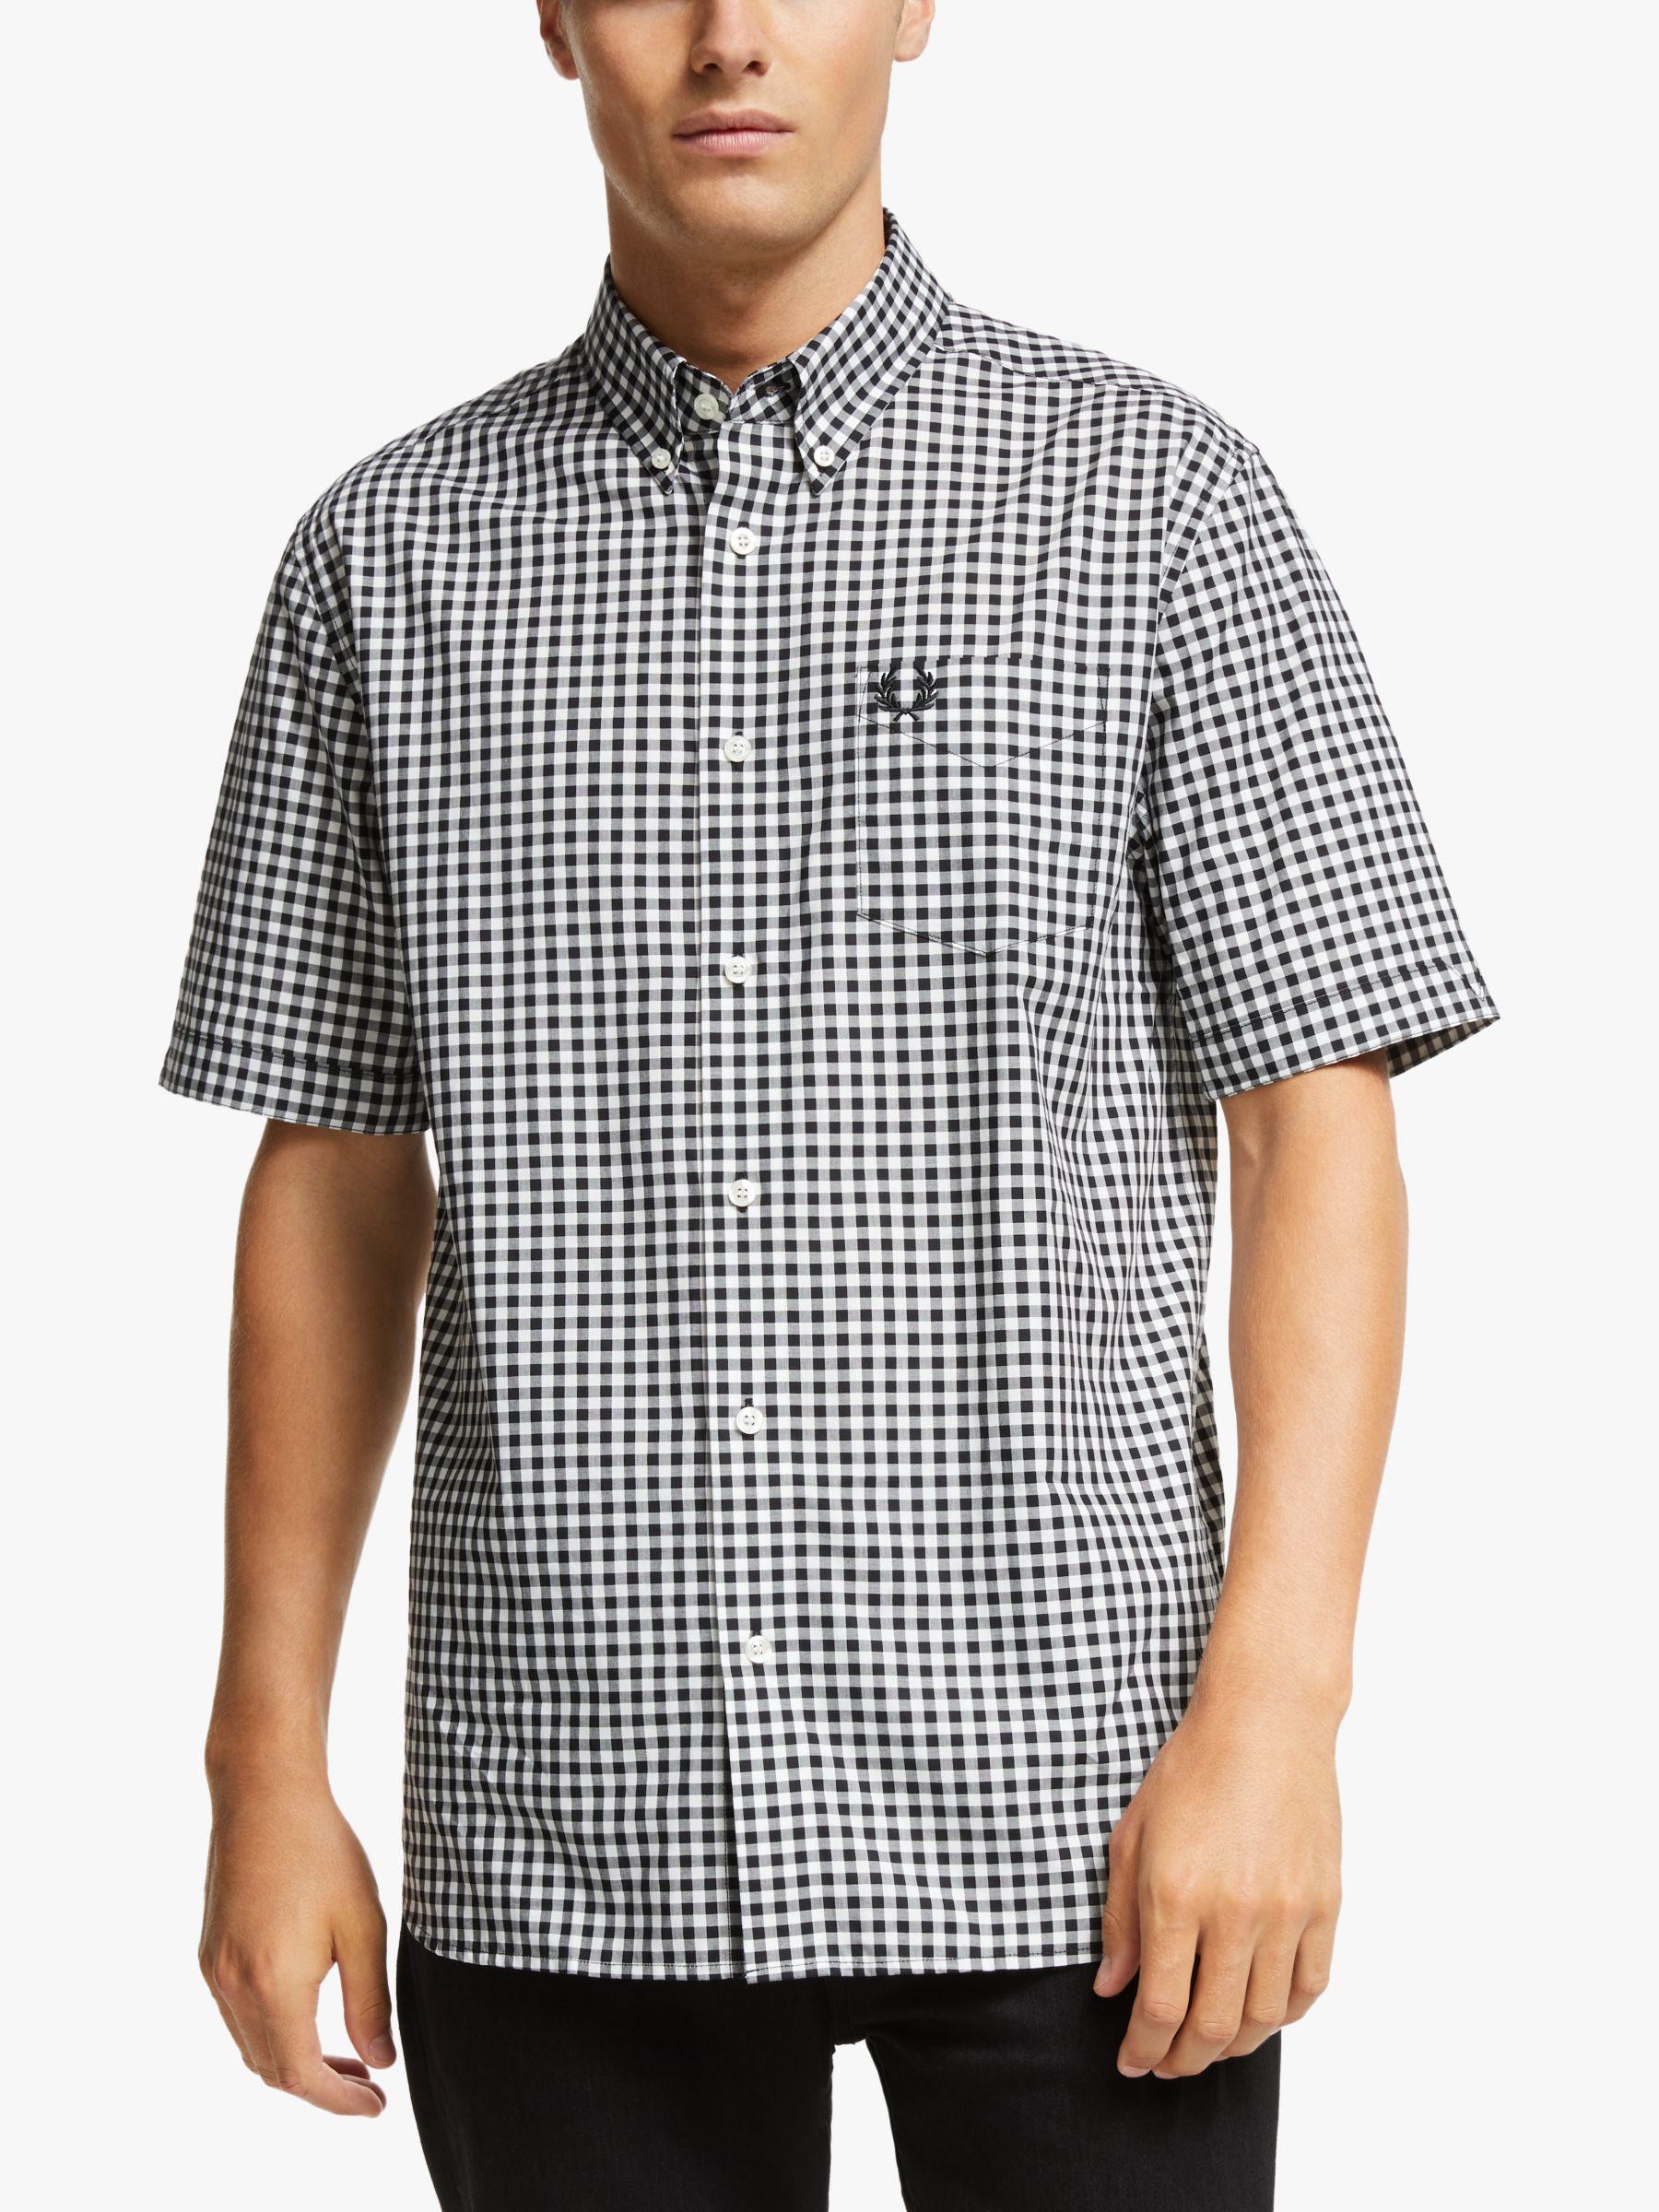 Fred Perry Short Sleeve Gingham Shirt at John Lewis & Partners